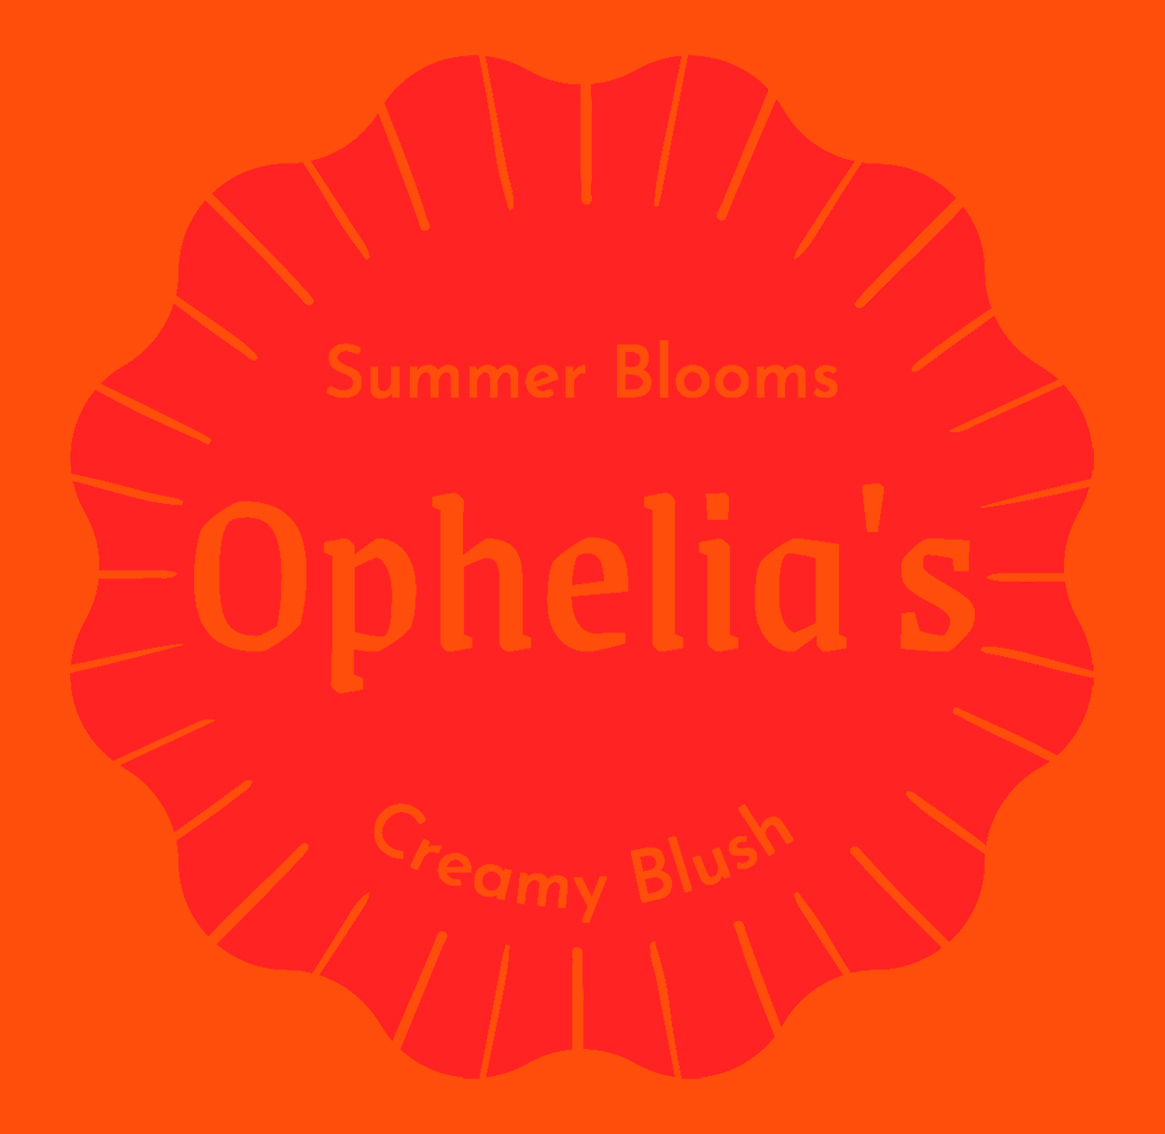 Example Artwork for Fluorescent Orange Paper Sticker, Ophelia's, printed WITHOUT White Underlay. Artwork: Canva